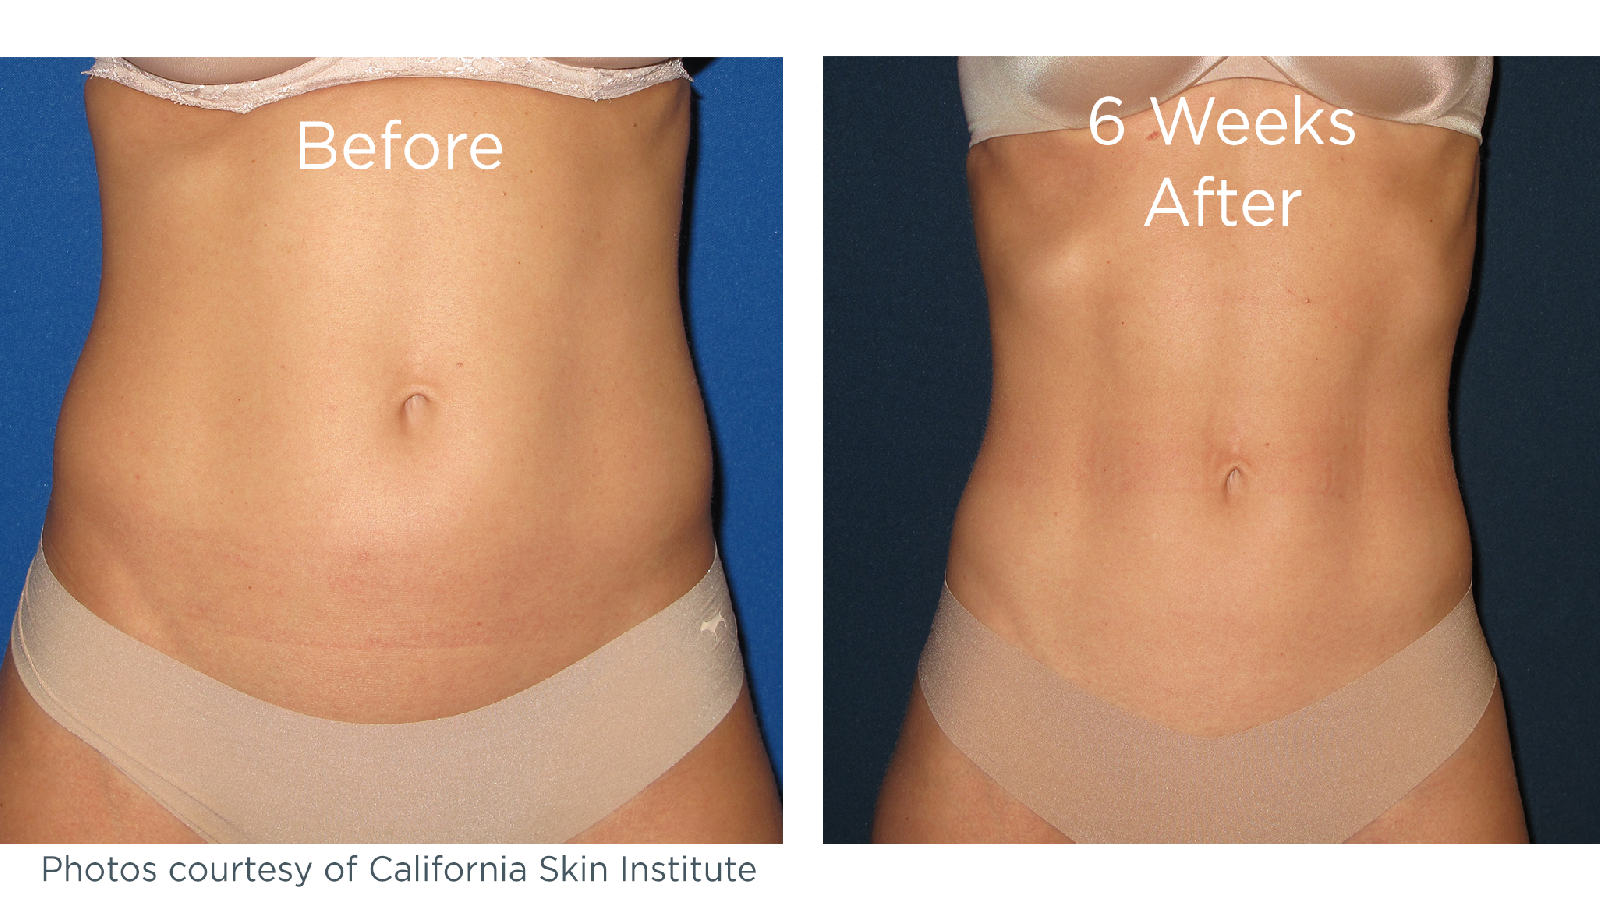 Picture of before and after results of CoolSculpting used on the abdomen.